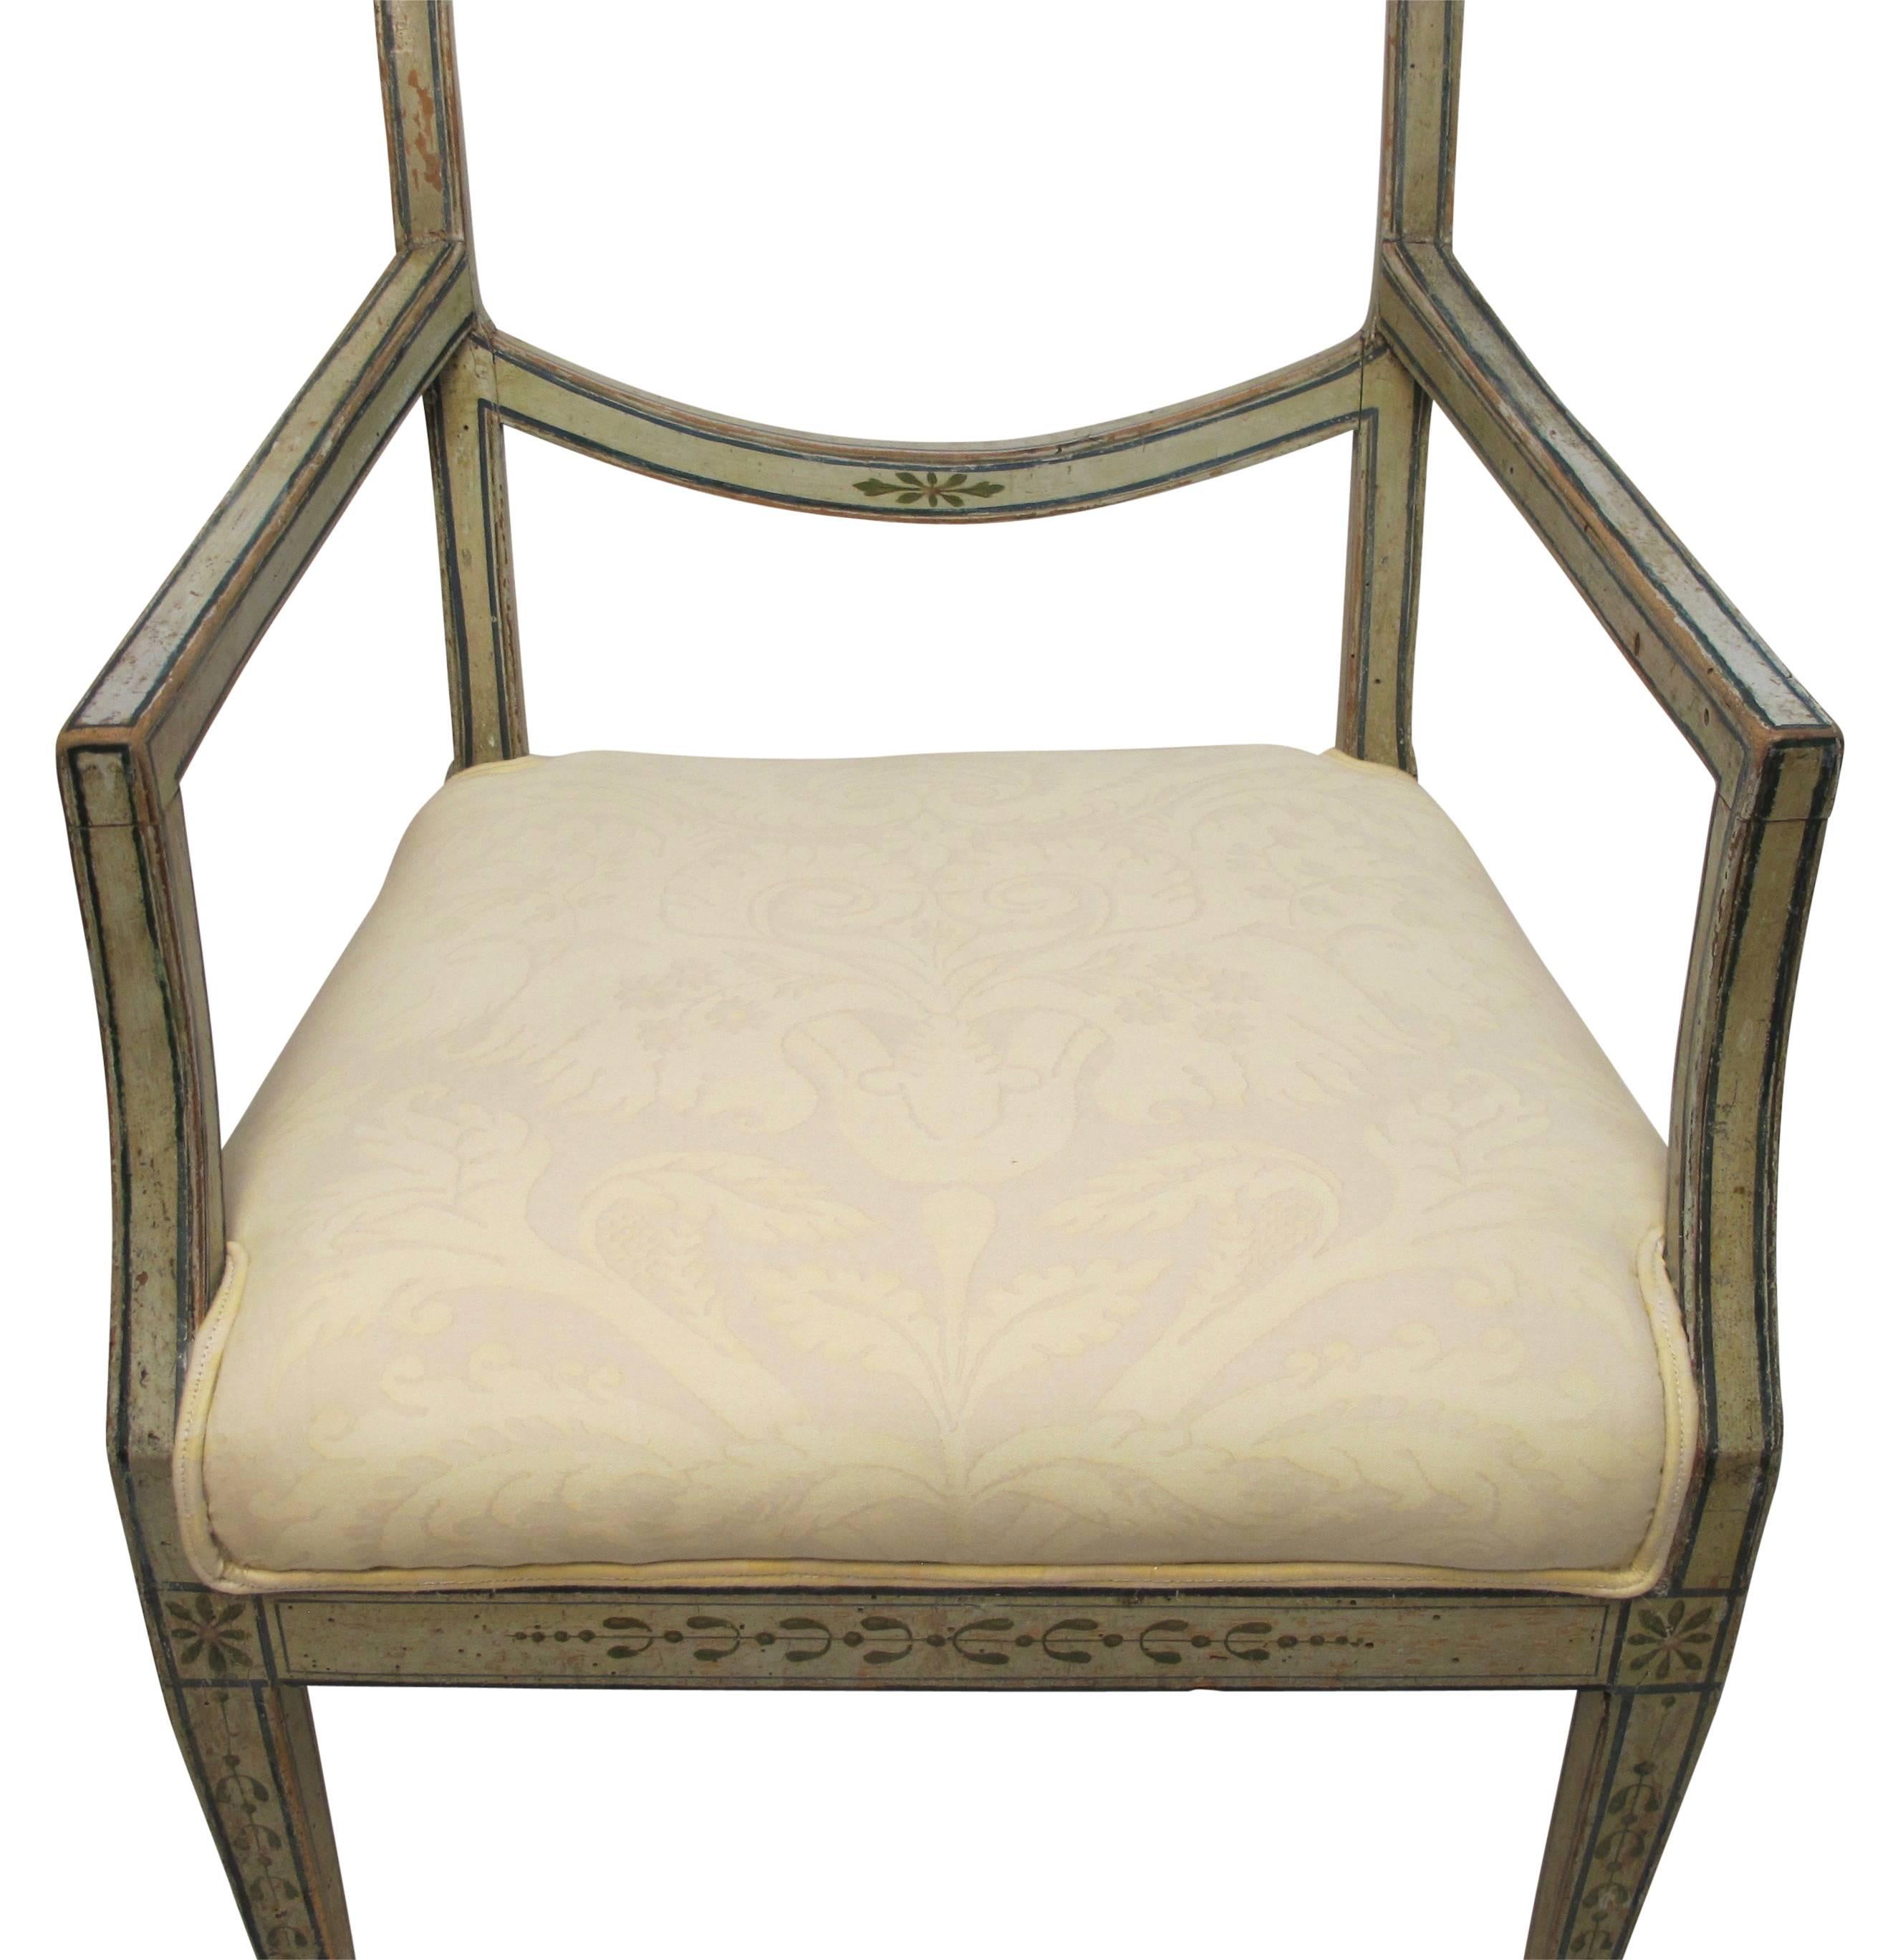 Wood Swedish Green Painted Armchair with Vintage Fortuny Upholstery, 19th Century